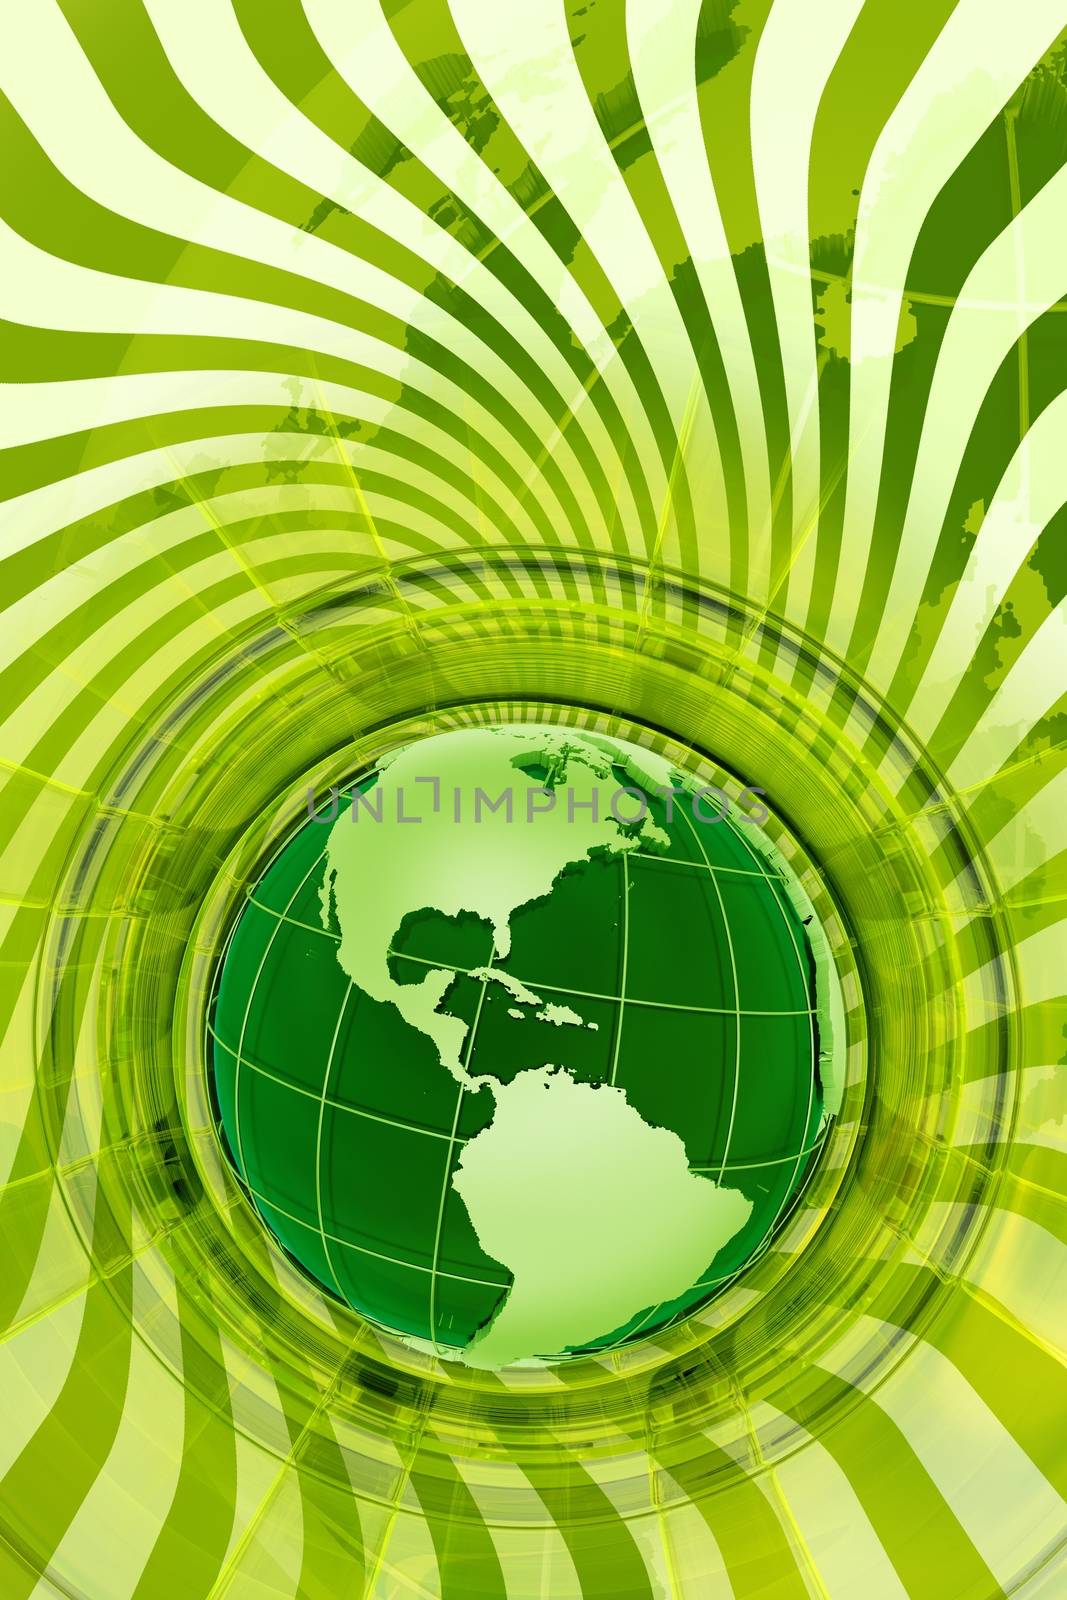 Green Global Design. Perfect Illustration for Global Go Green Movement. Vertical Green Design with Globe Model and Spiral Rays Background.